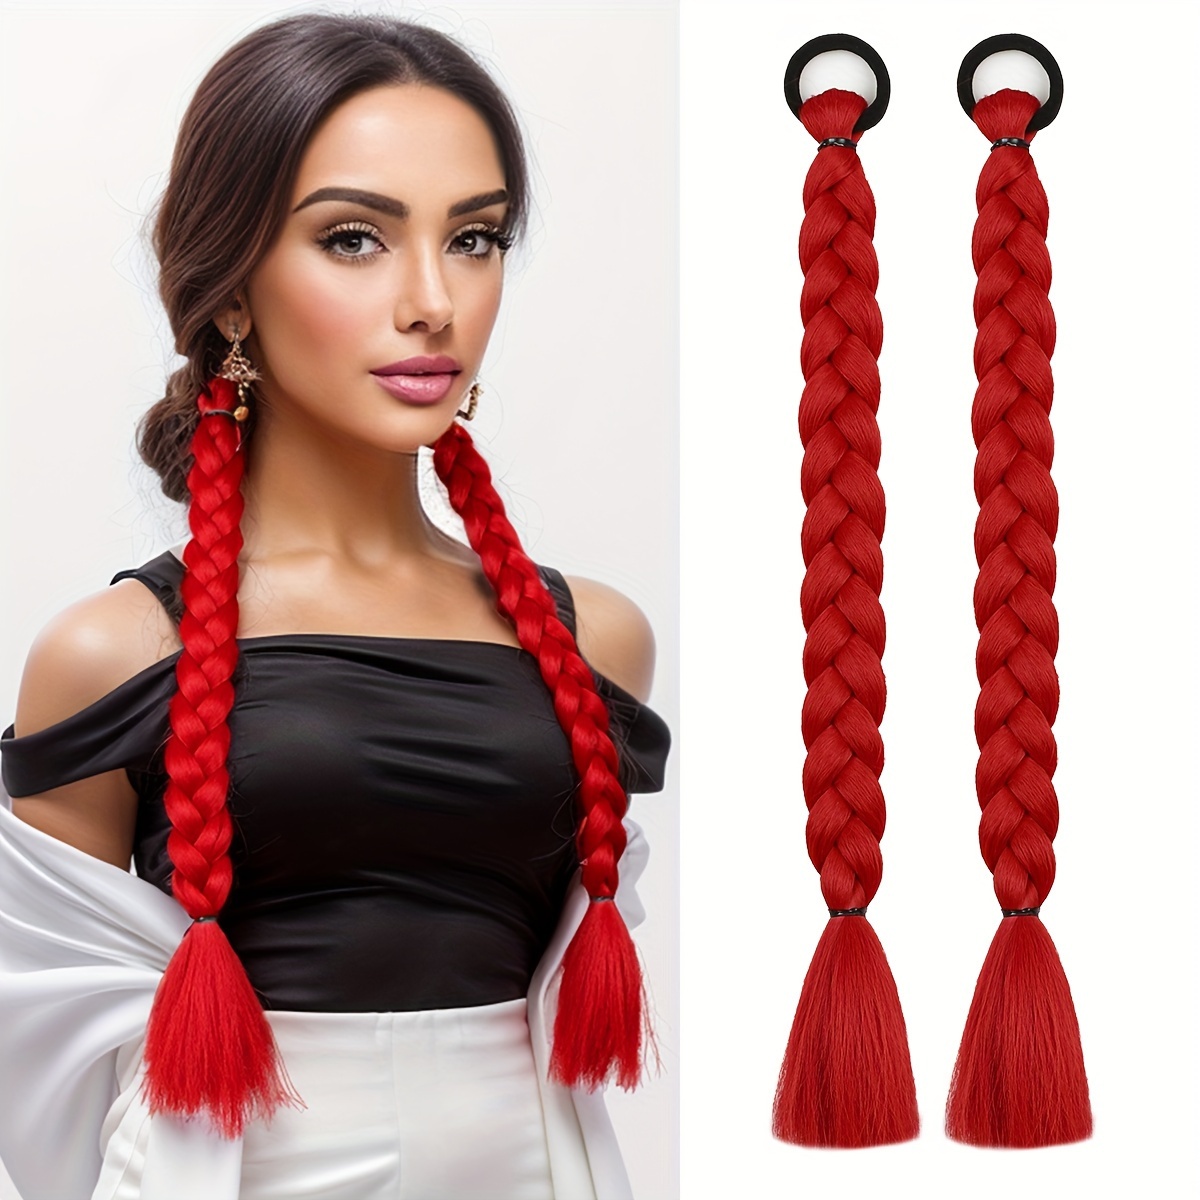 26 Inch Long Braided Ponytail Extension with Hair Tie Straight Wrap